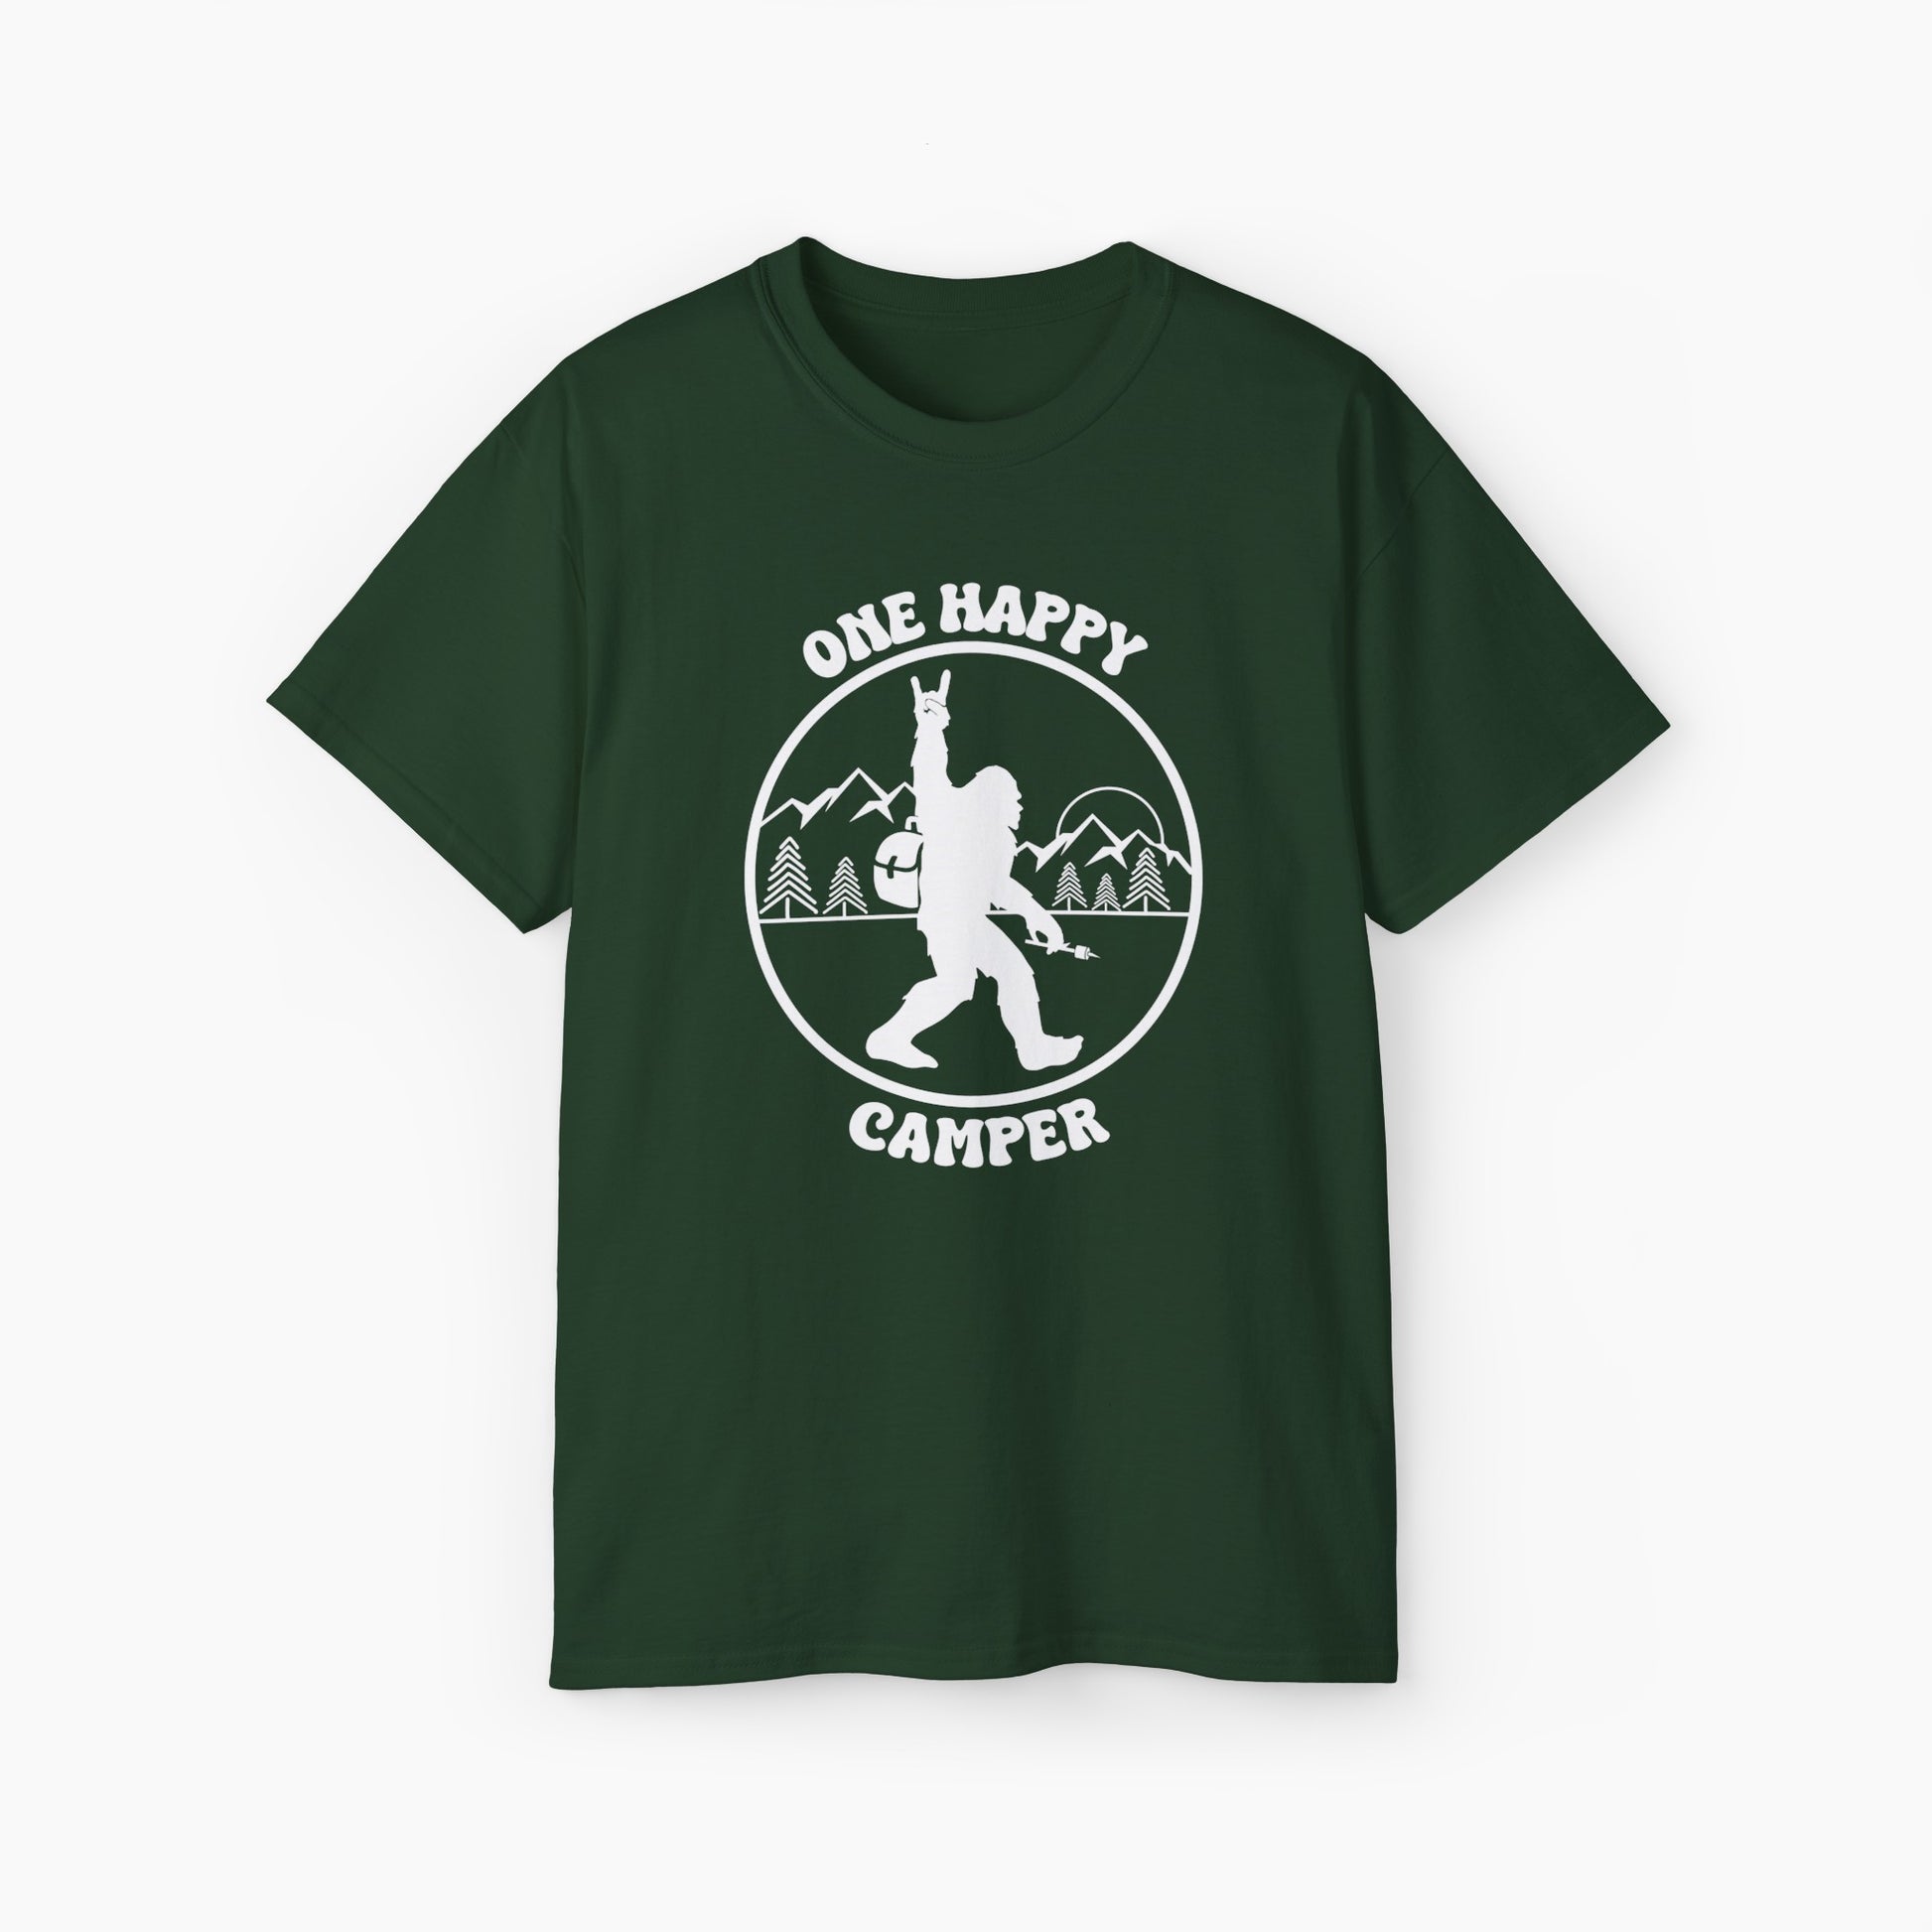 Green t-shirt with 'One Happy Camper' text, featuring Bigfoot making a peace sign, set against a subtle background of trees and mountains.